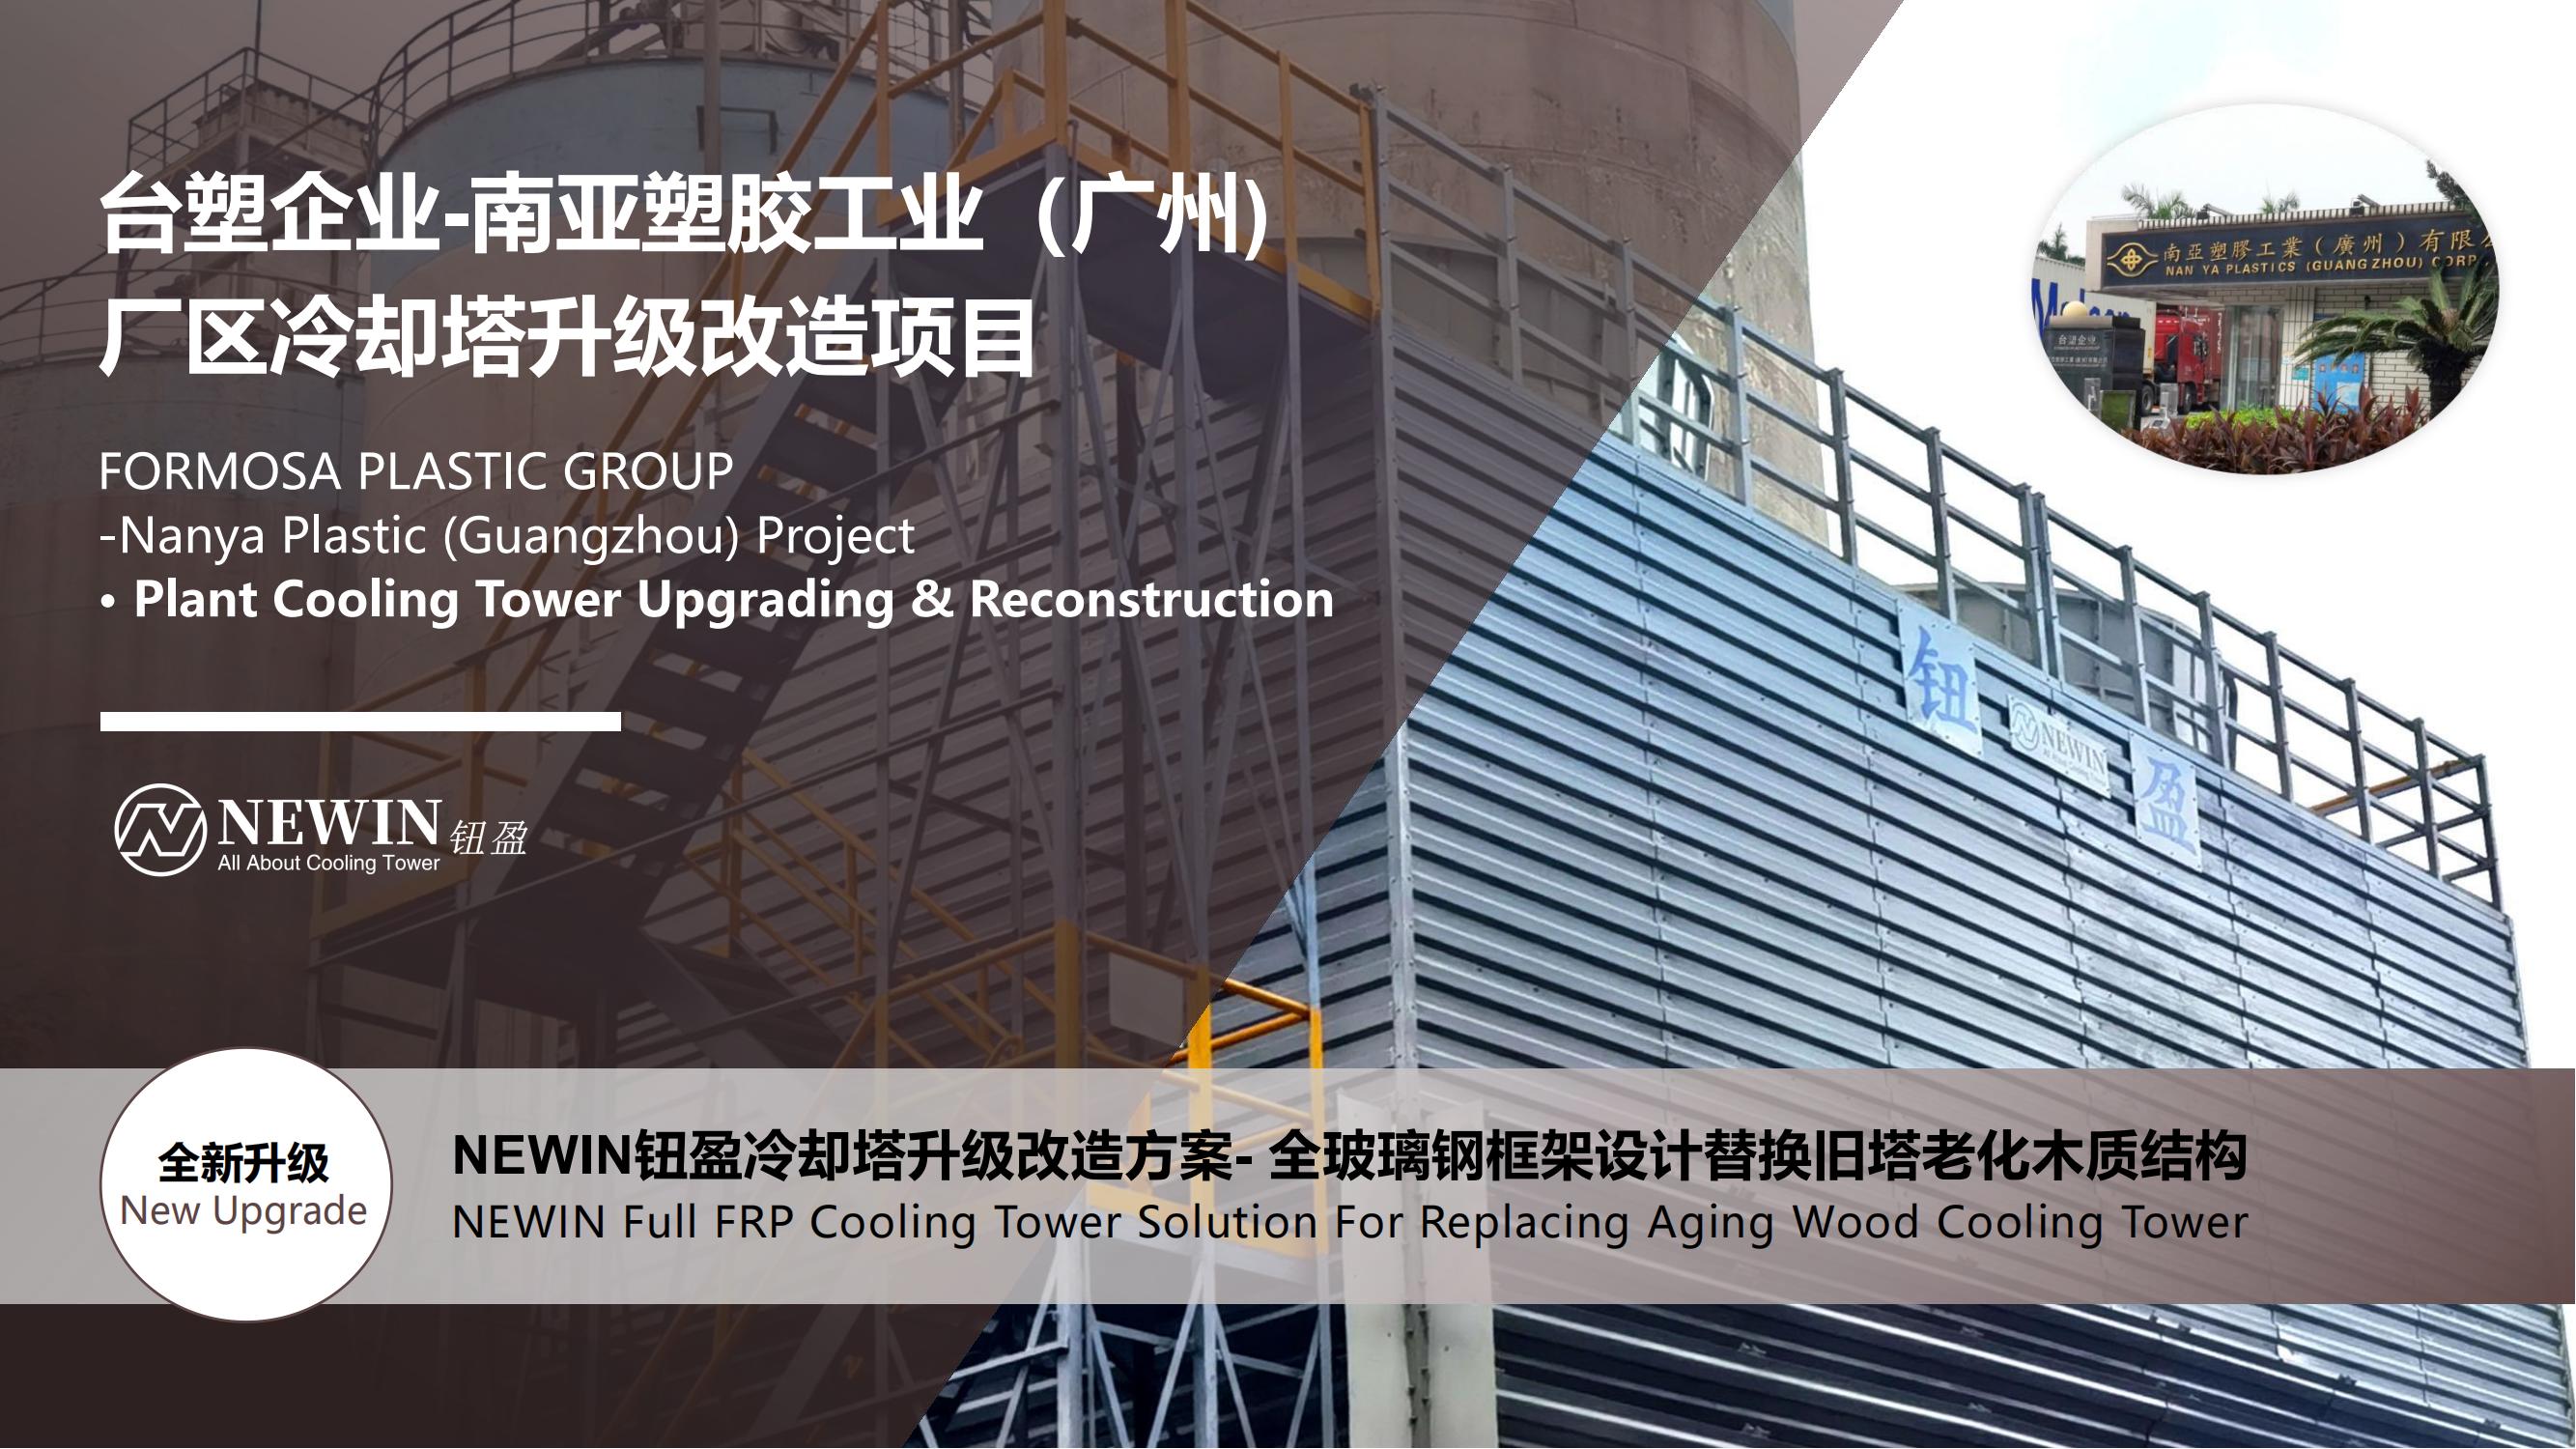 NEWIN NSH-FRP Full FRP Cooling Tower Solution for Nanya Plastic Factory